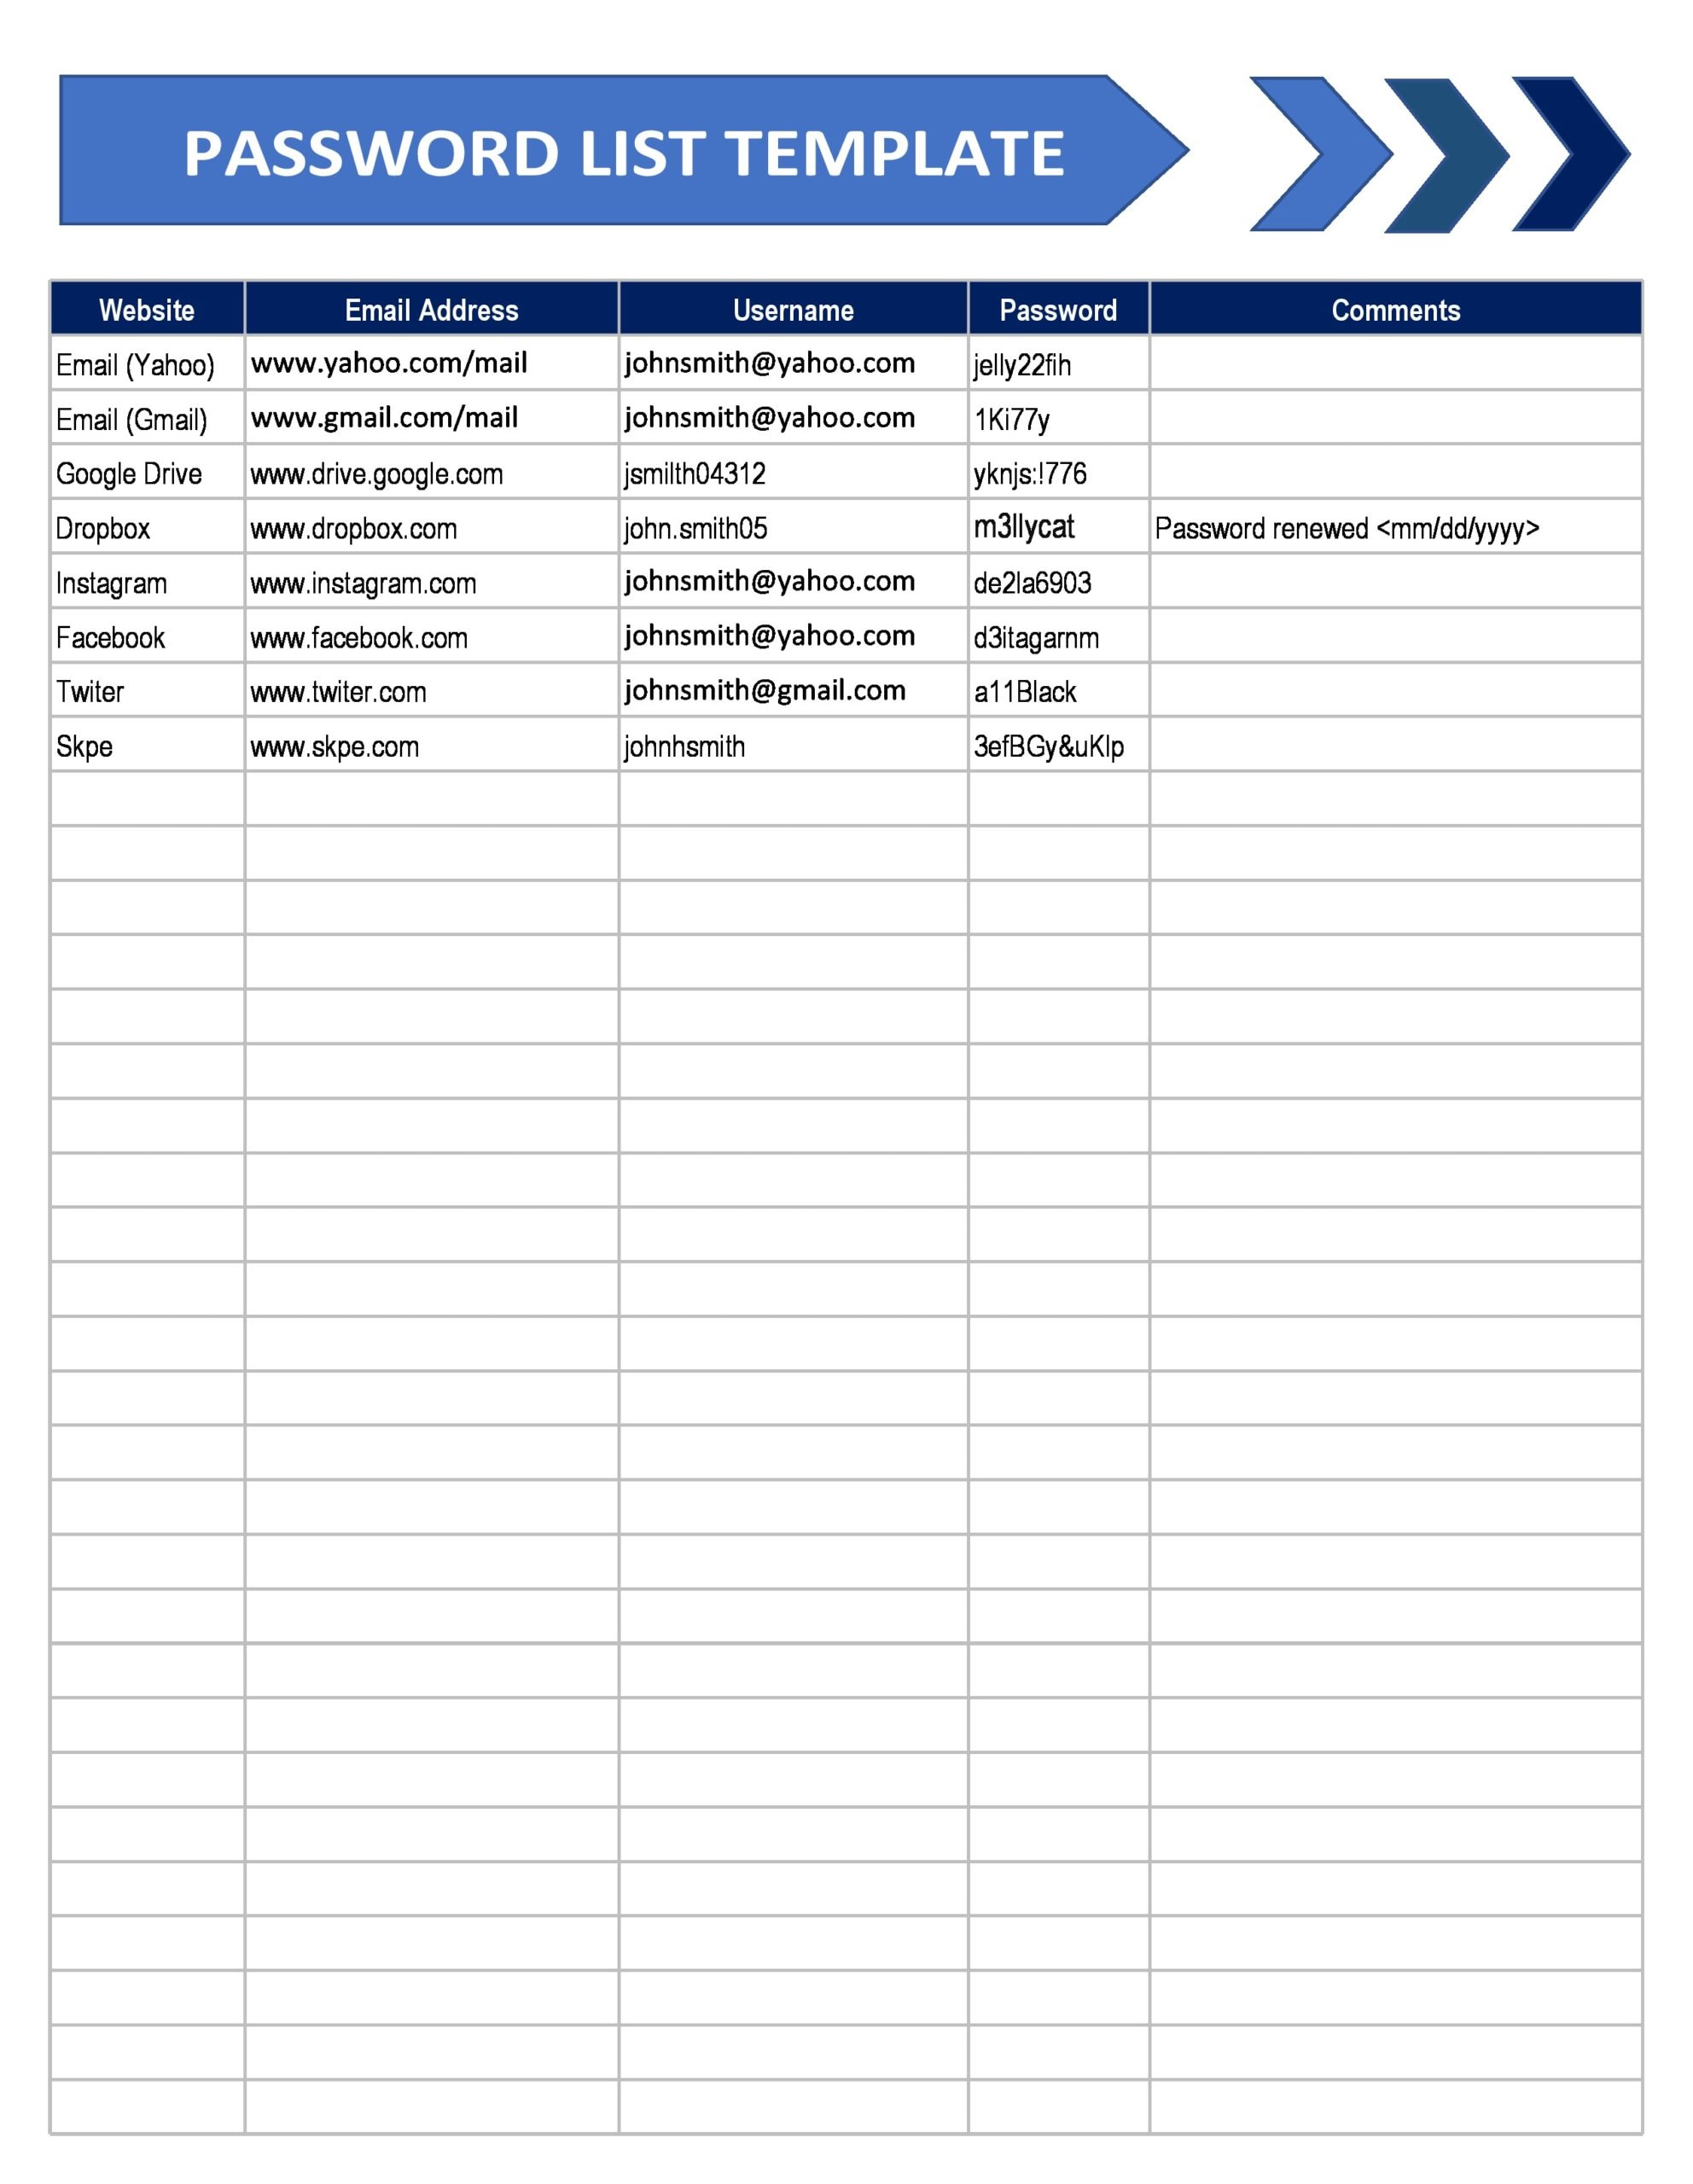 password list template excel on microsoft office